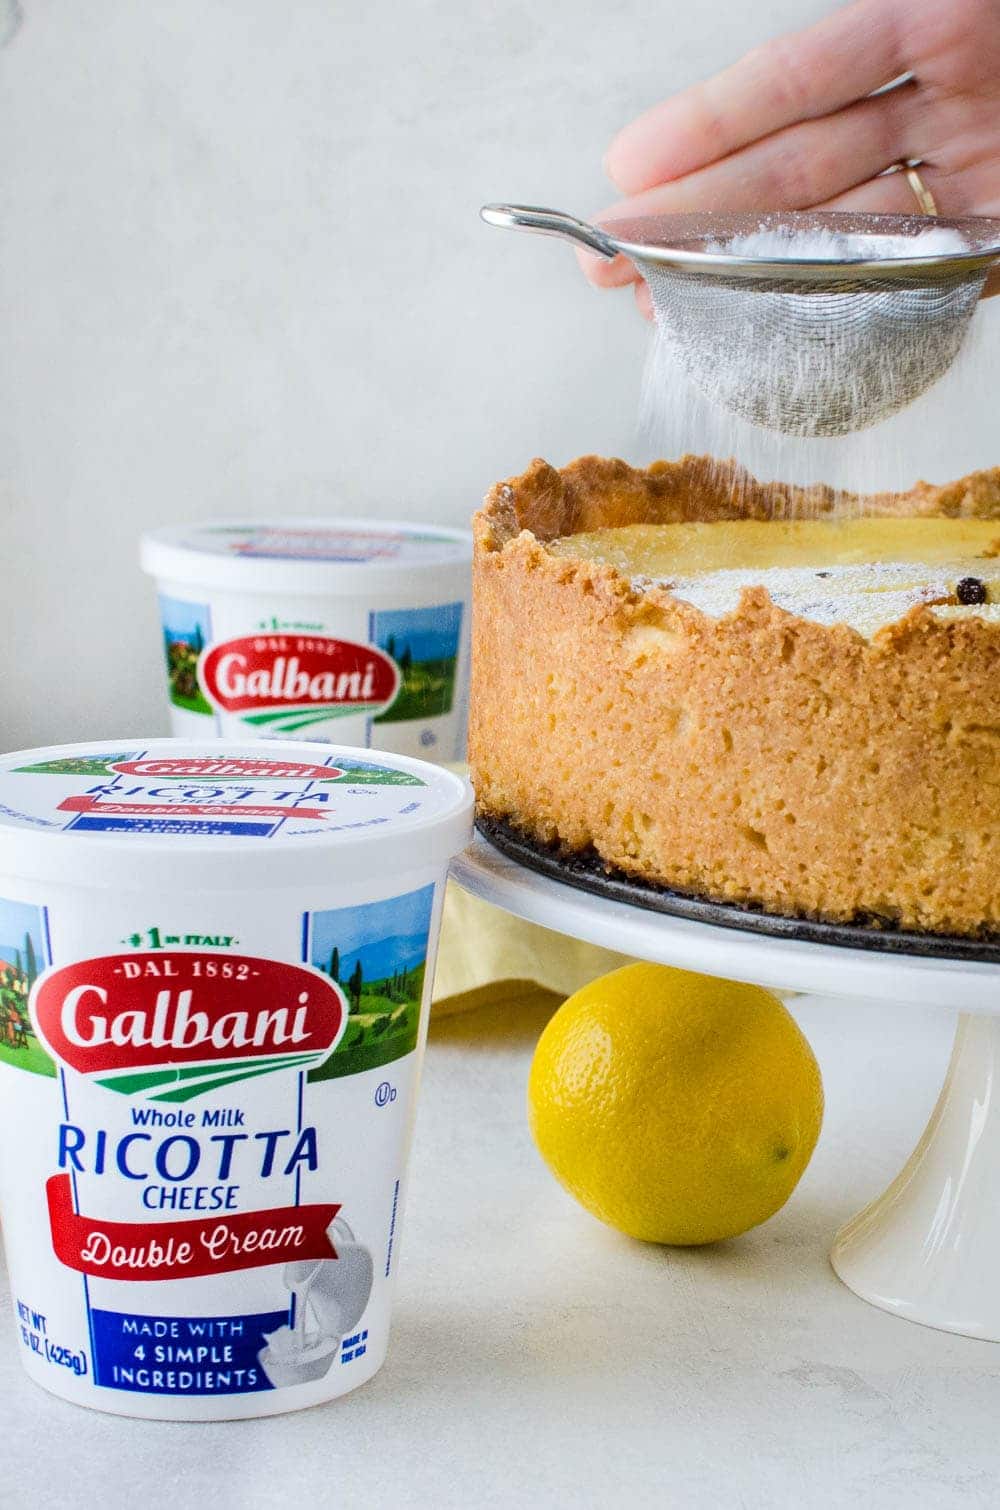 sprinkling sugar on the easter pie with a container of Galbani ricotta next to it.